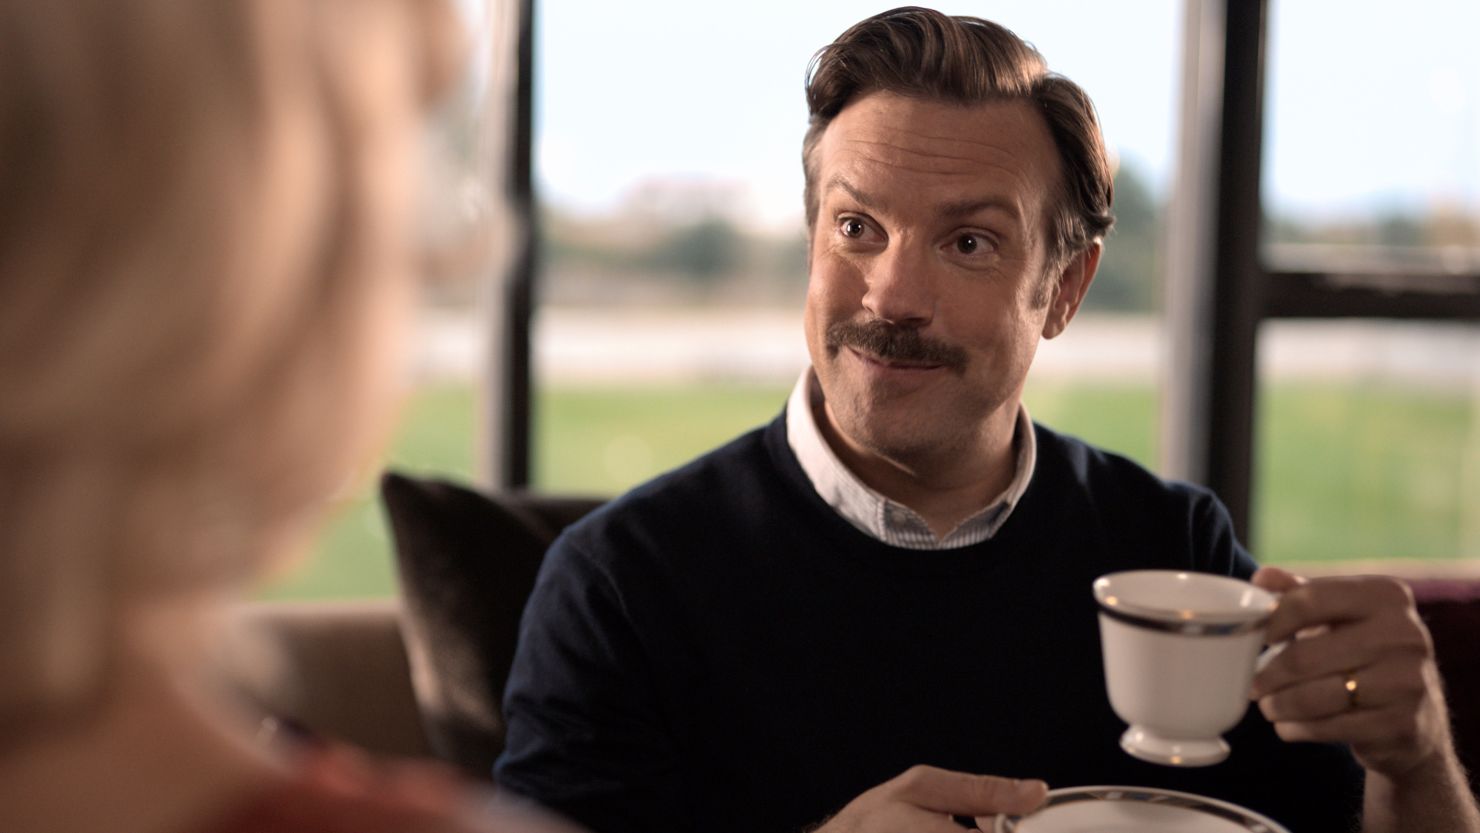 Apple has announced the official return date for 'Ted Lasso' and debuted a new trailer.